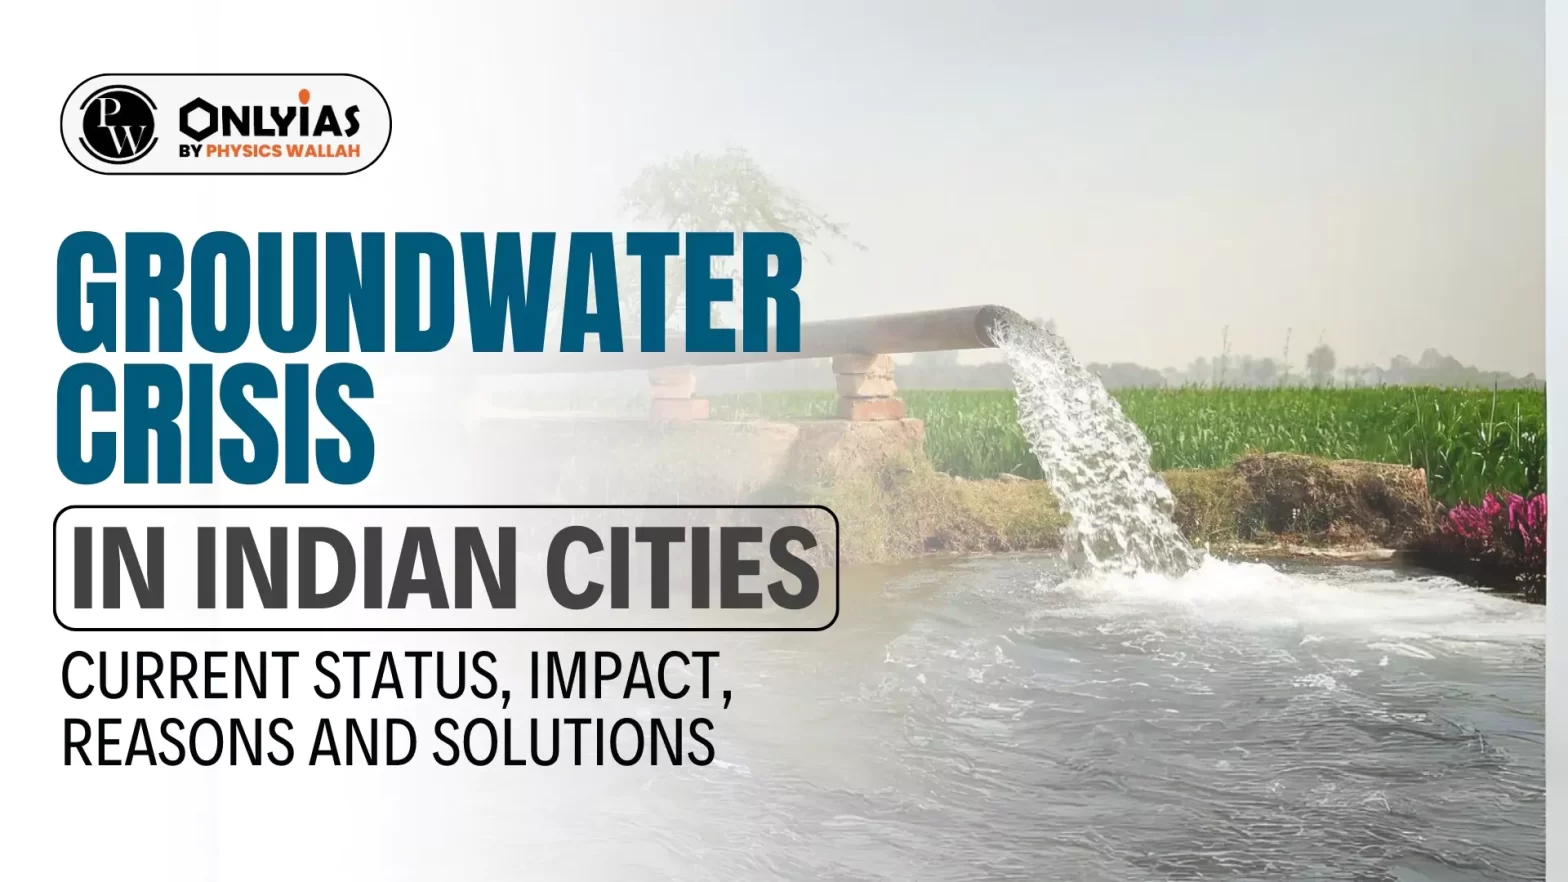 Groundwater Crisis in Indian Cities: Current Status, Impact, Reasons and Solutions